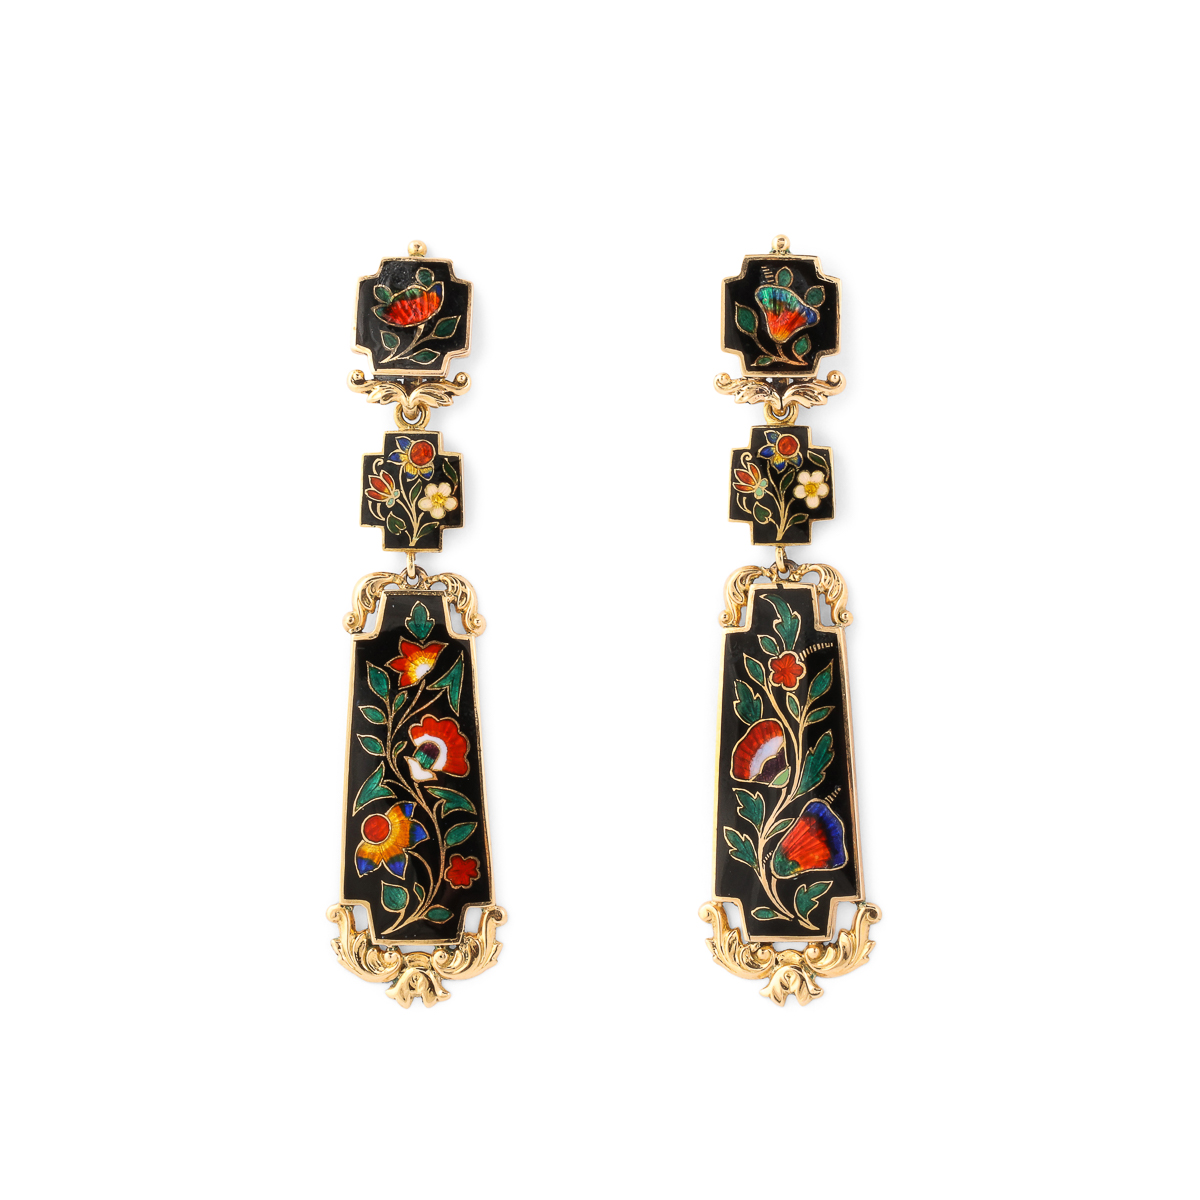 Gold earrings with enameled floral design